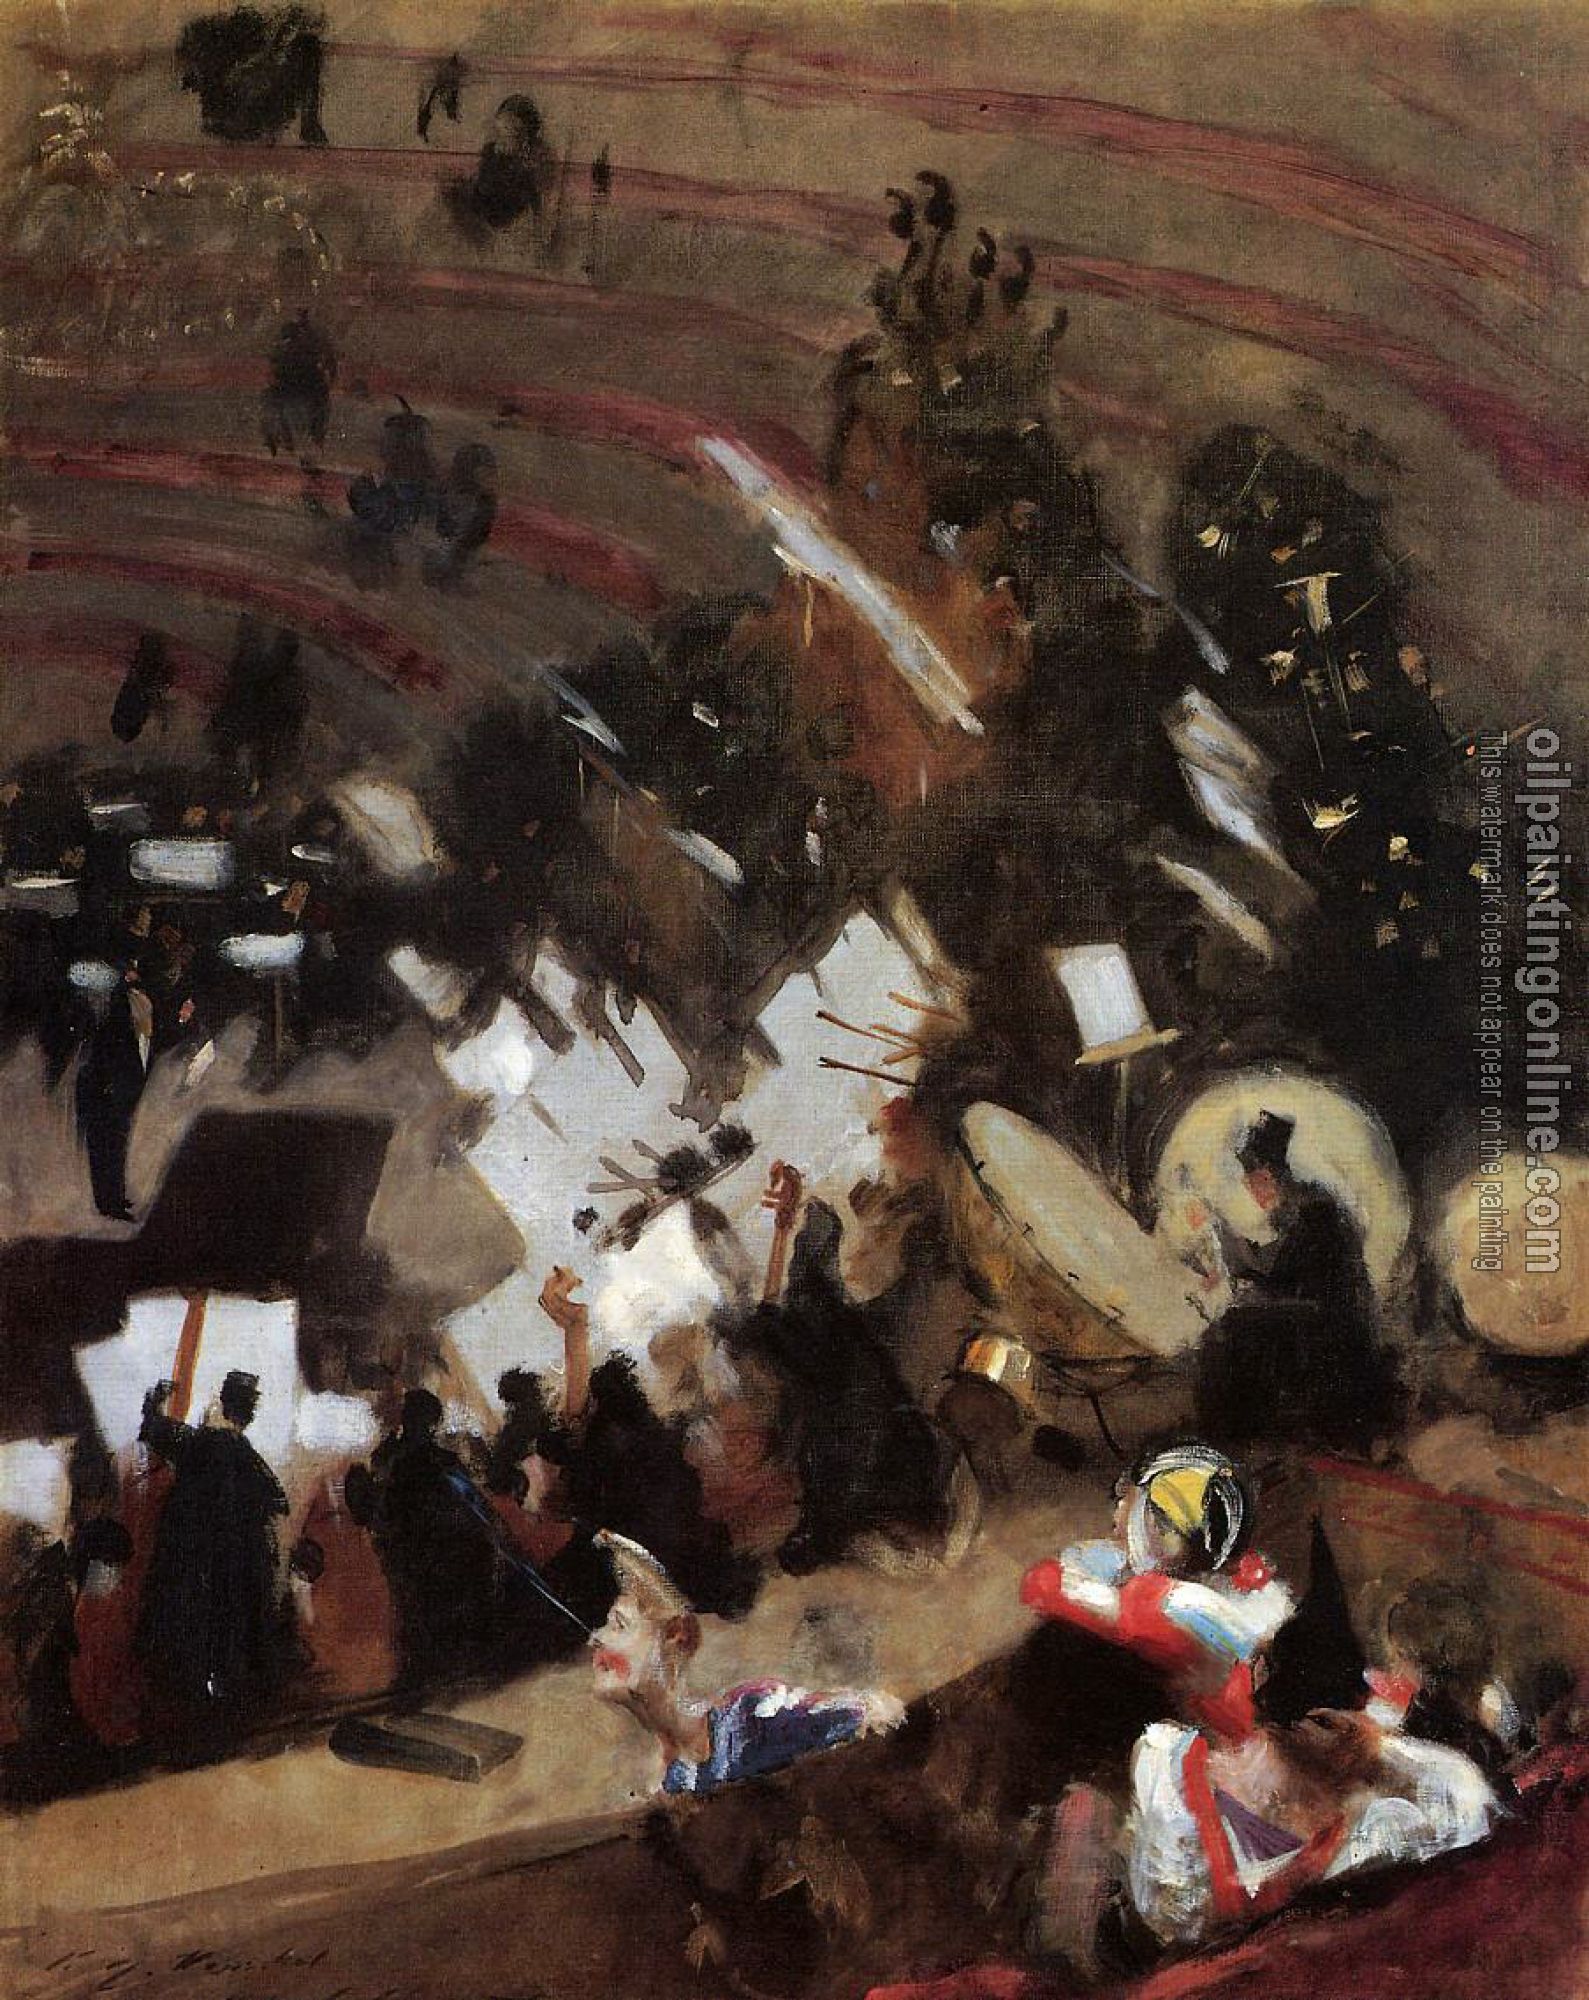 Sargent, John Singer - Rehearsal of the Pas de Loup Orchestra at the Cirque d'Hiver